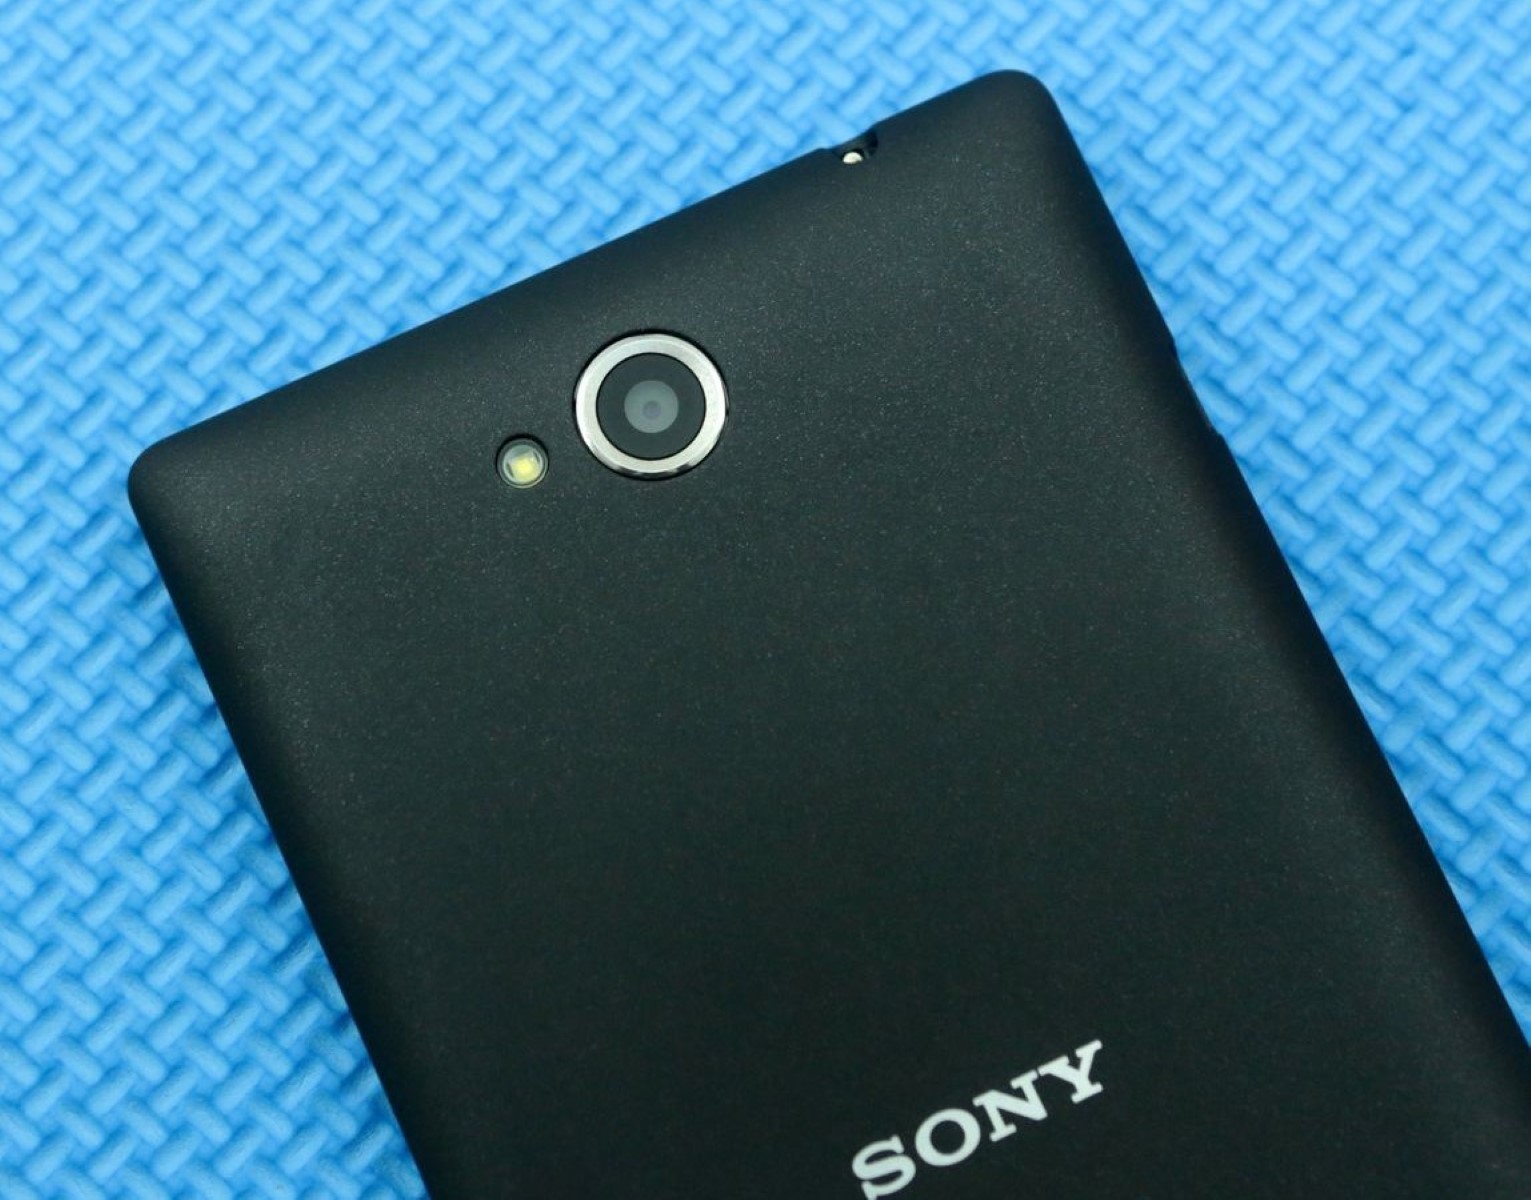 sony-xperia-c-manufacturing-country-all-you-need-to-know